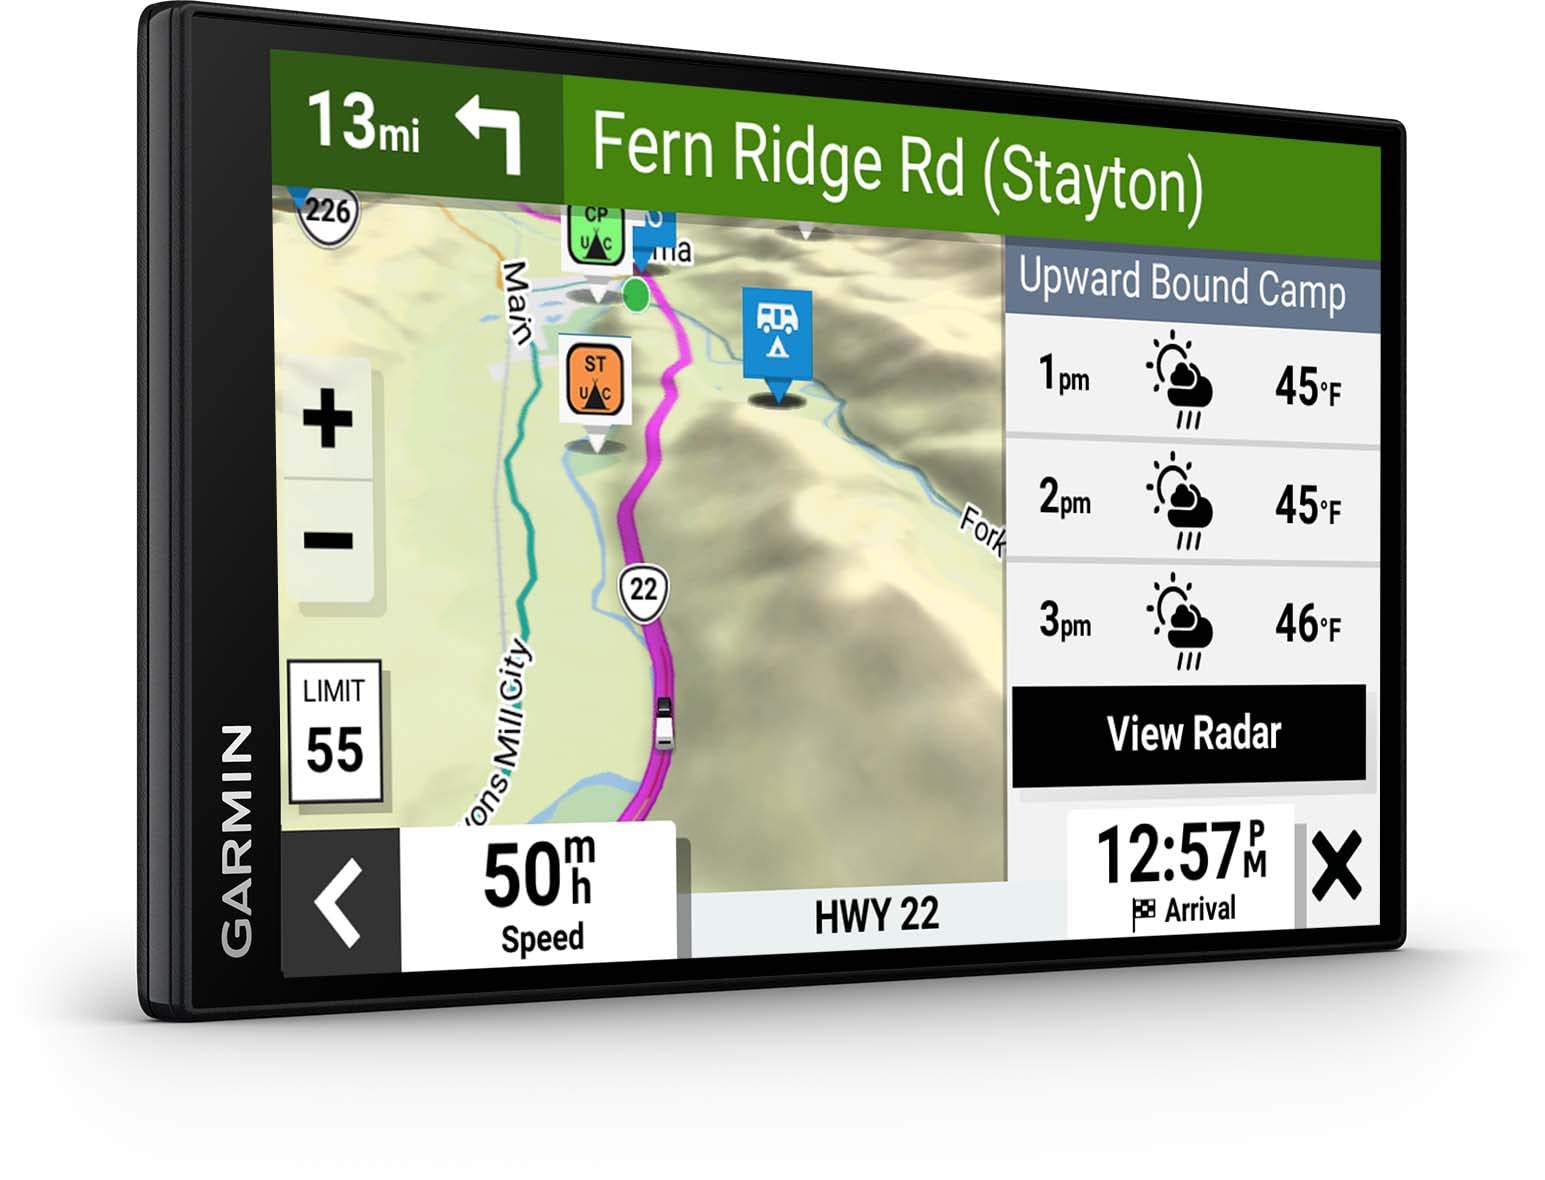 Garmin RV 795, Large, Easy-to-Read 7” GPS RV Navigator, Custom RV Routing, High-Resolution Birdseye Satellite Imagery, Directory of RV Parks and Services, Access Live Traffic and Weather